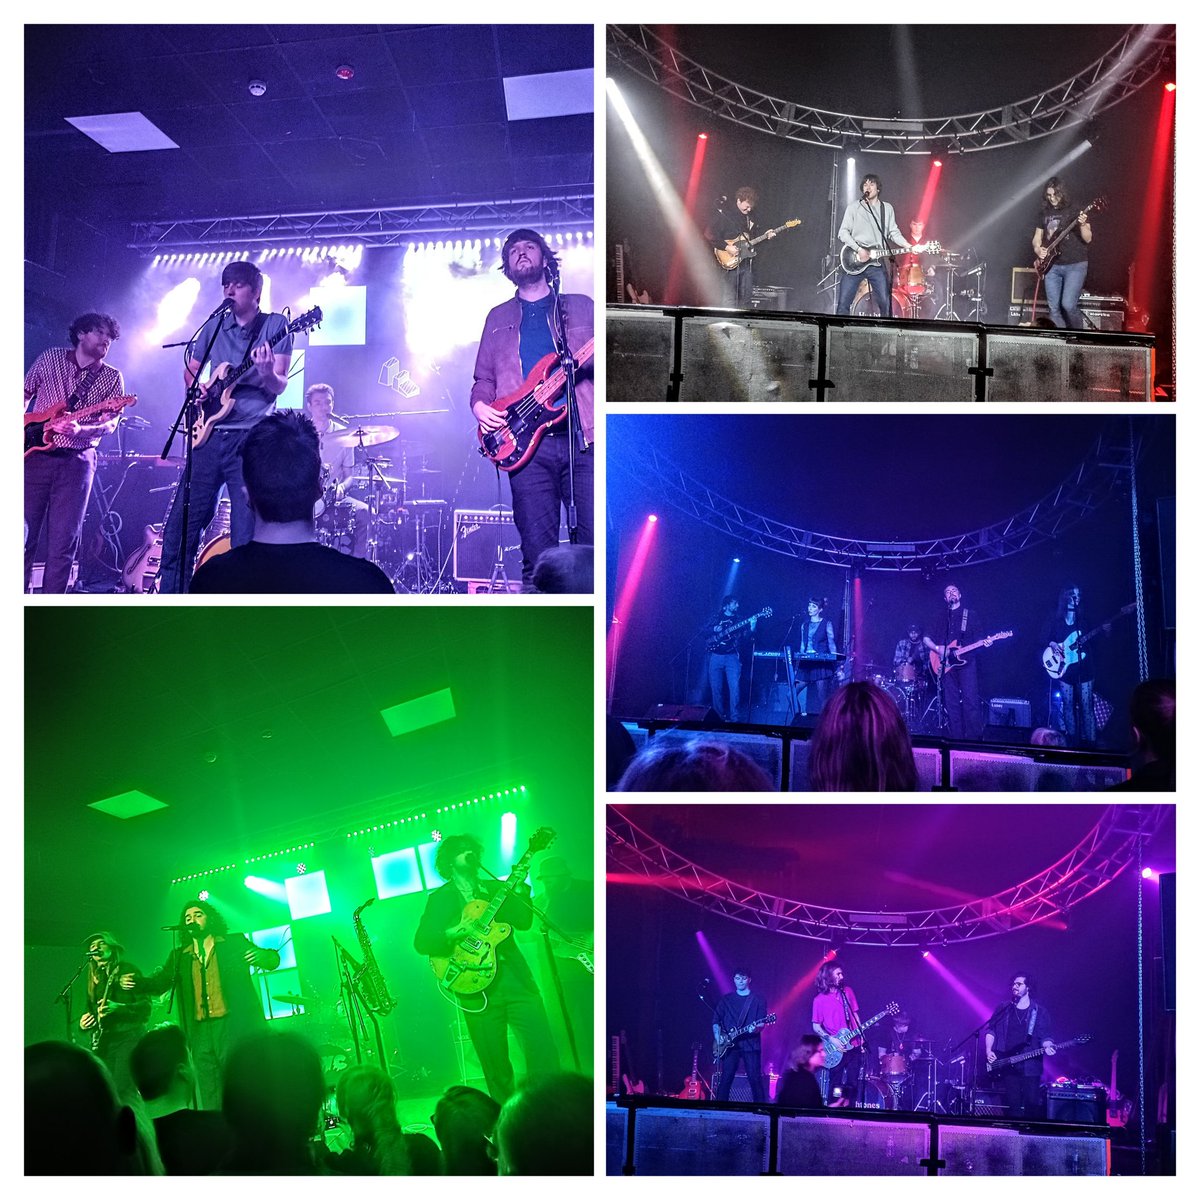 A wonderful end to an excellent Independent Venue Week with two more brilliant gigs over the weekend 🔥 #IVW24 @Hushtonesmusic @Ambedo_Blue @RIVIA_BAND @CVCband_ @Casino_band_